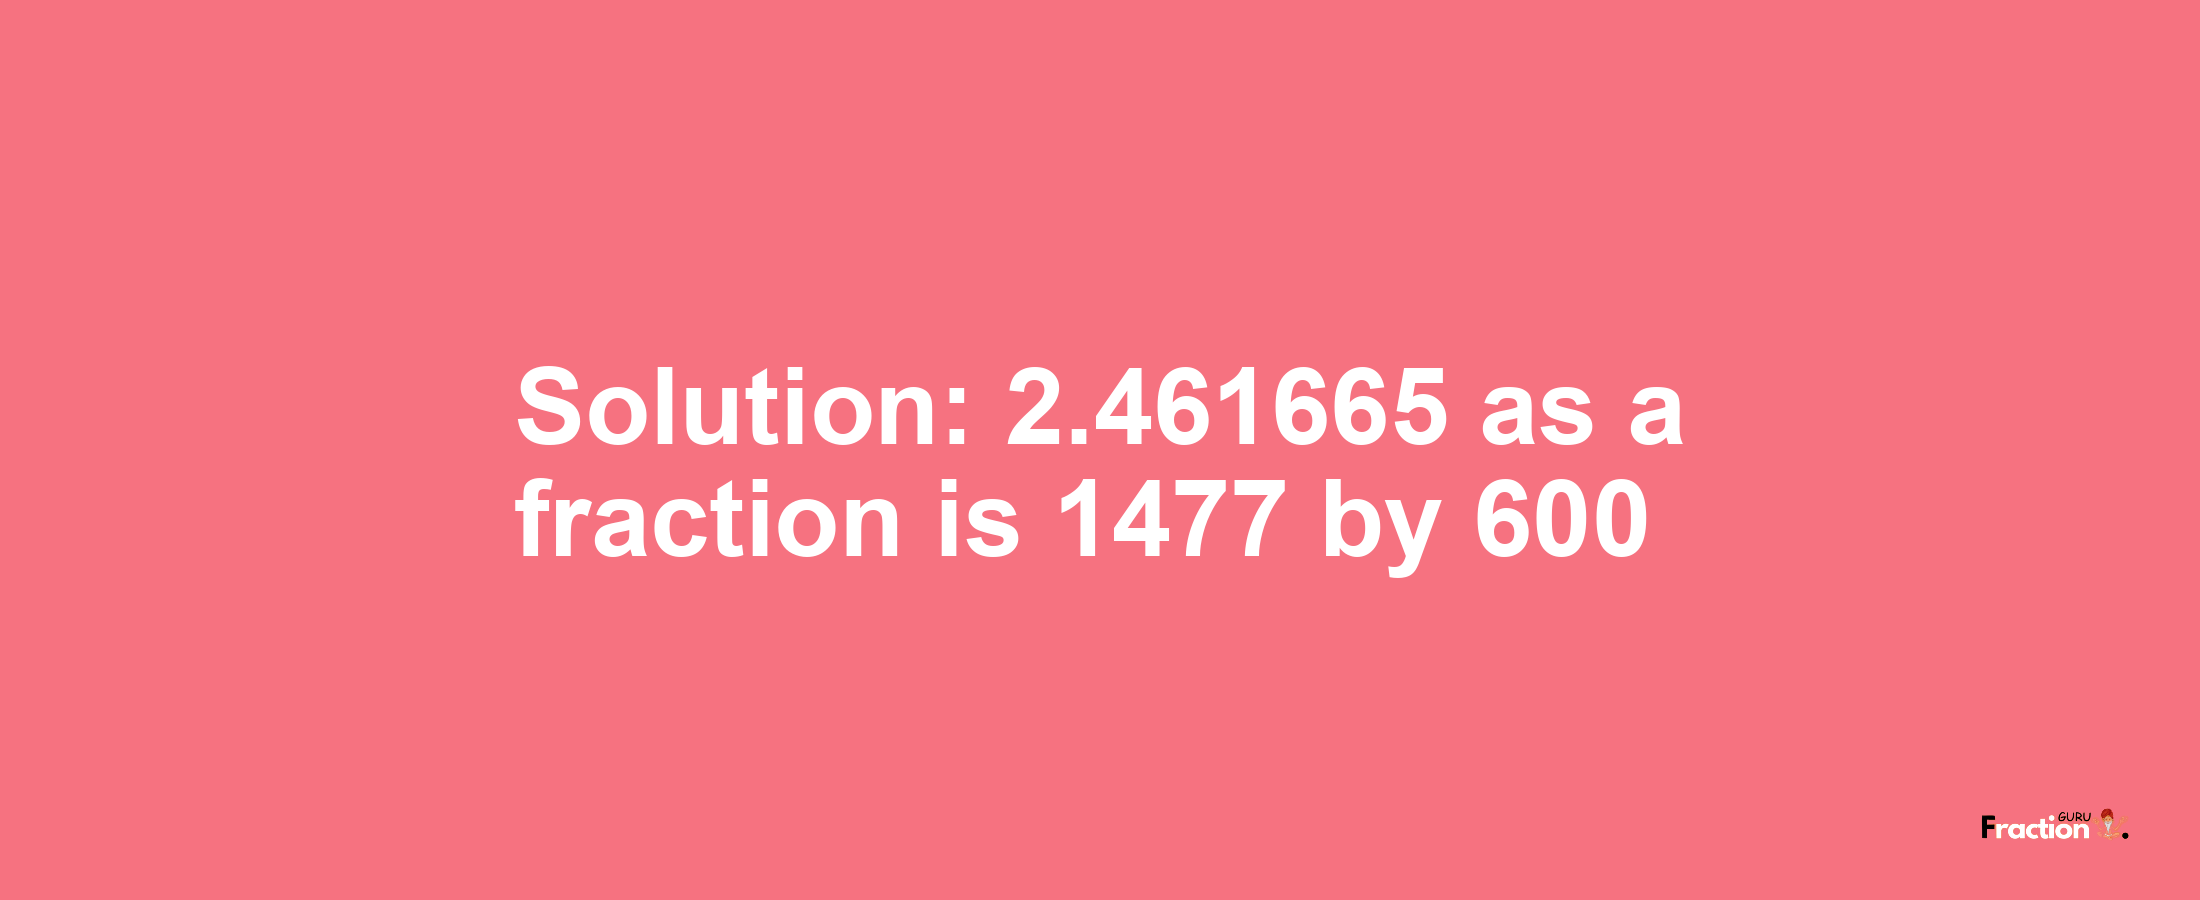 Solution:2.461665 as a fraction is 1477/600